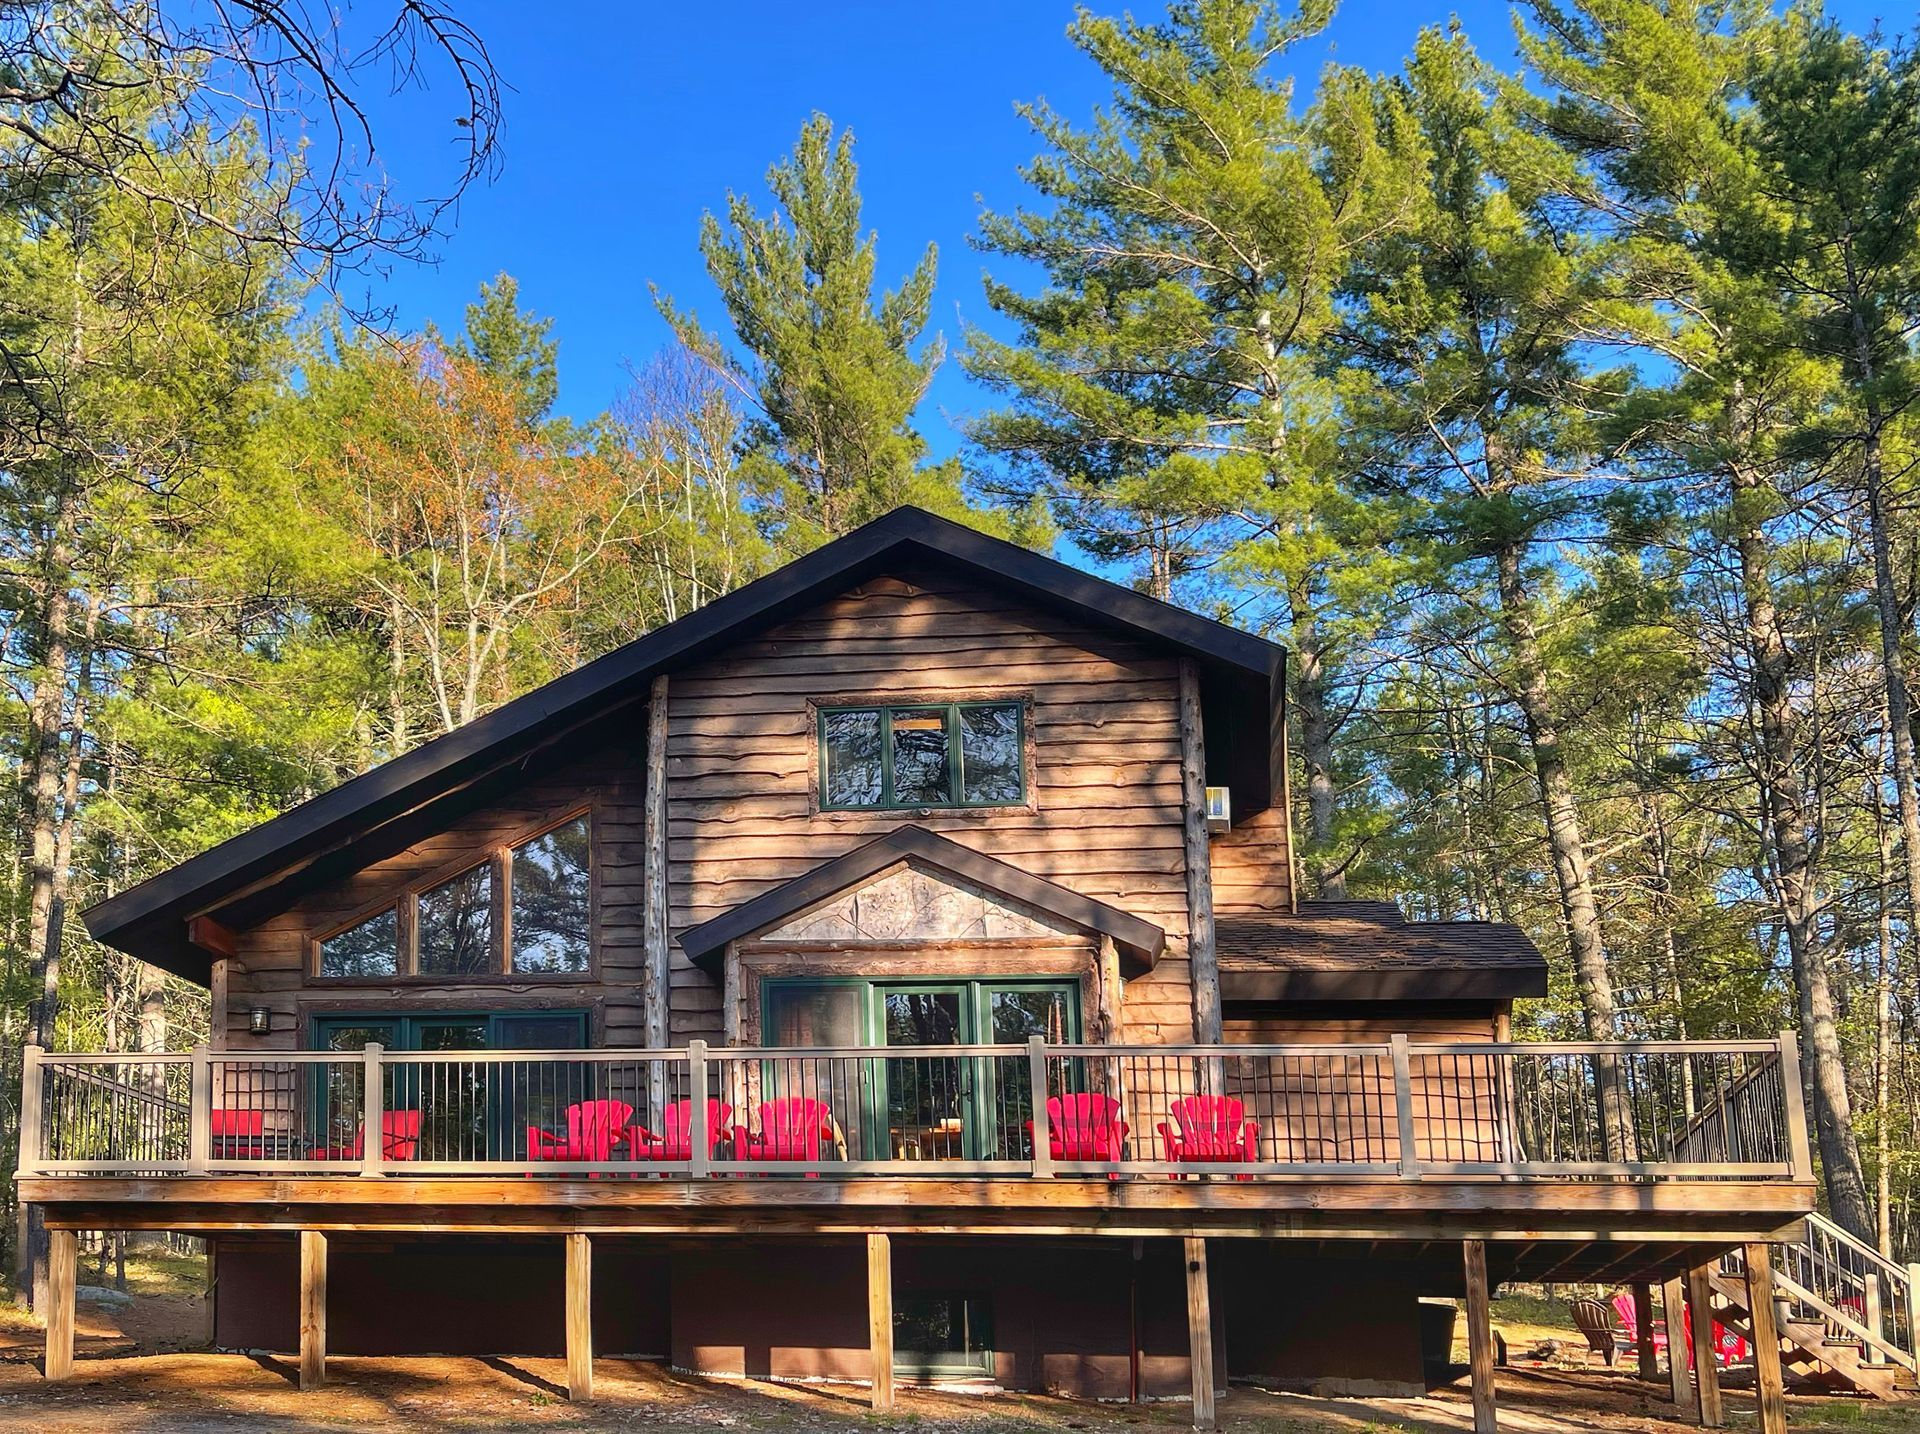 ADK Cabin near Whiteface Mountain and Lake Placid NY